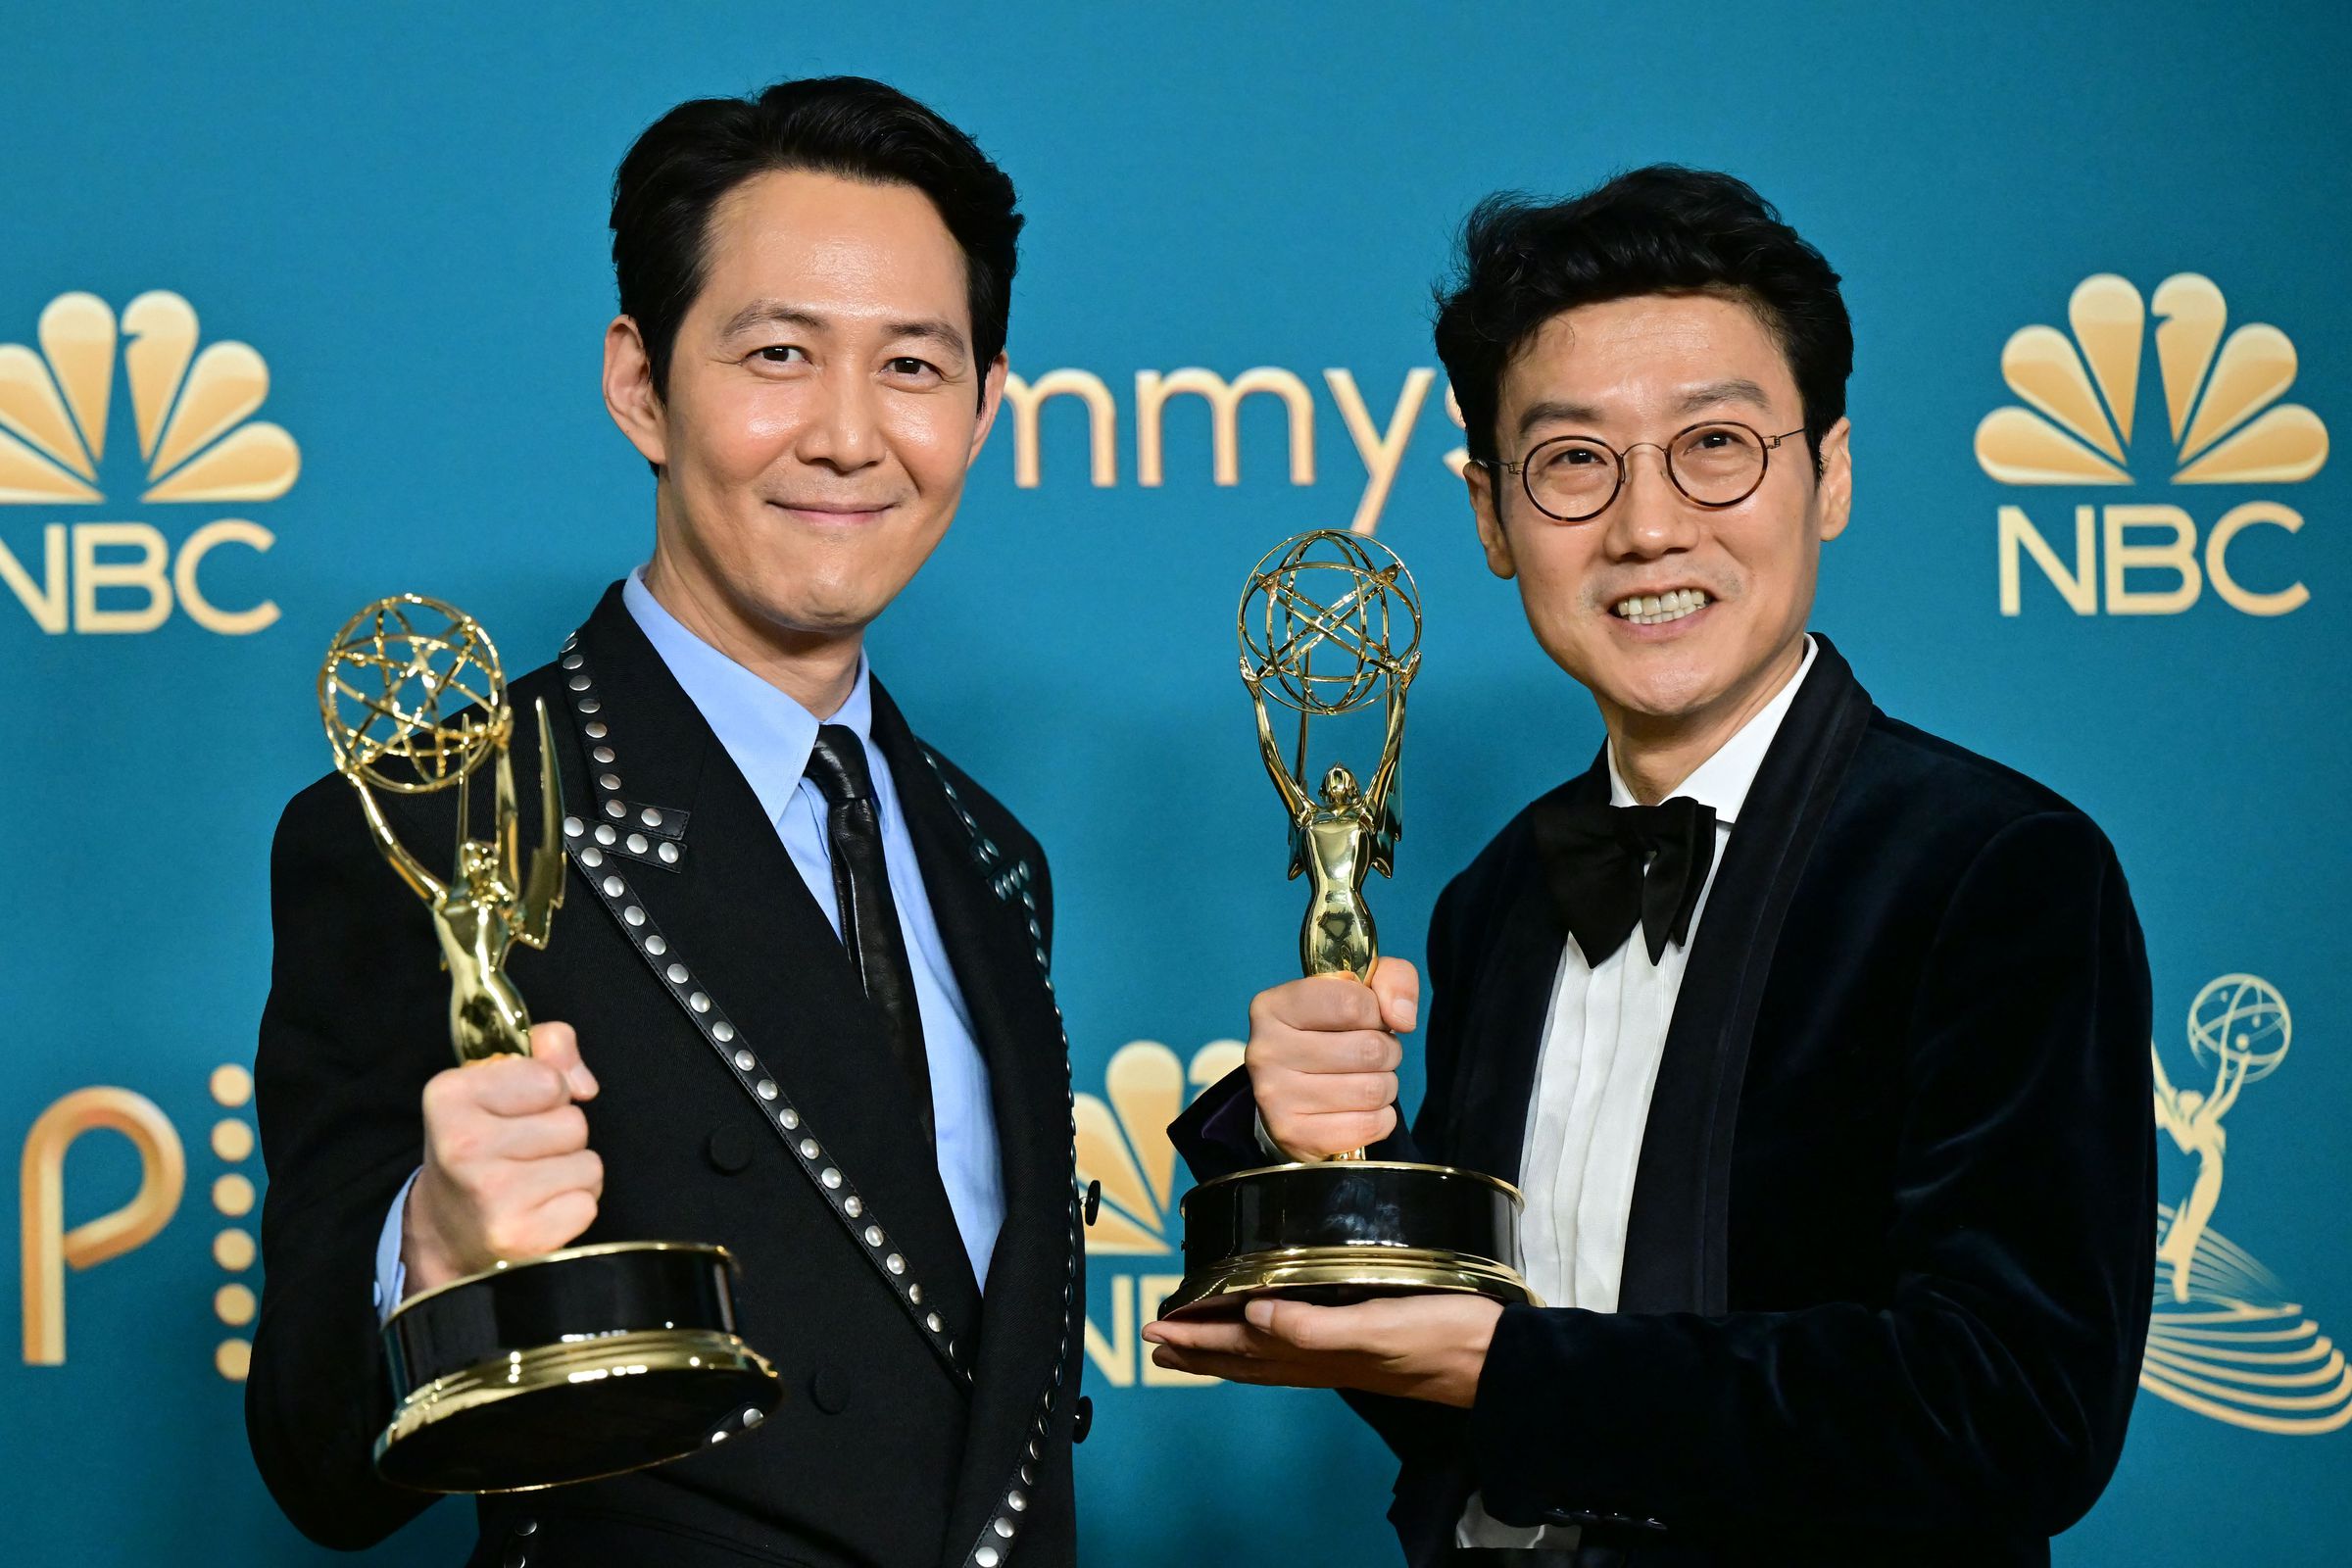 Actor Lee Jung-jae and Squid Game director Hwang Dong-hyuk posing with their Emmys in front of a turquoise backdrop.